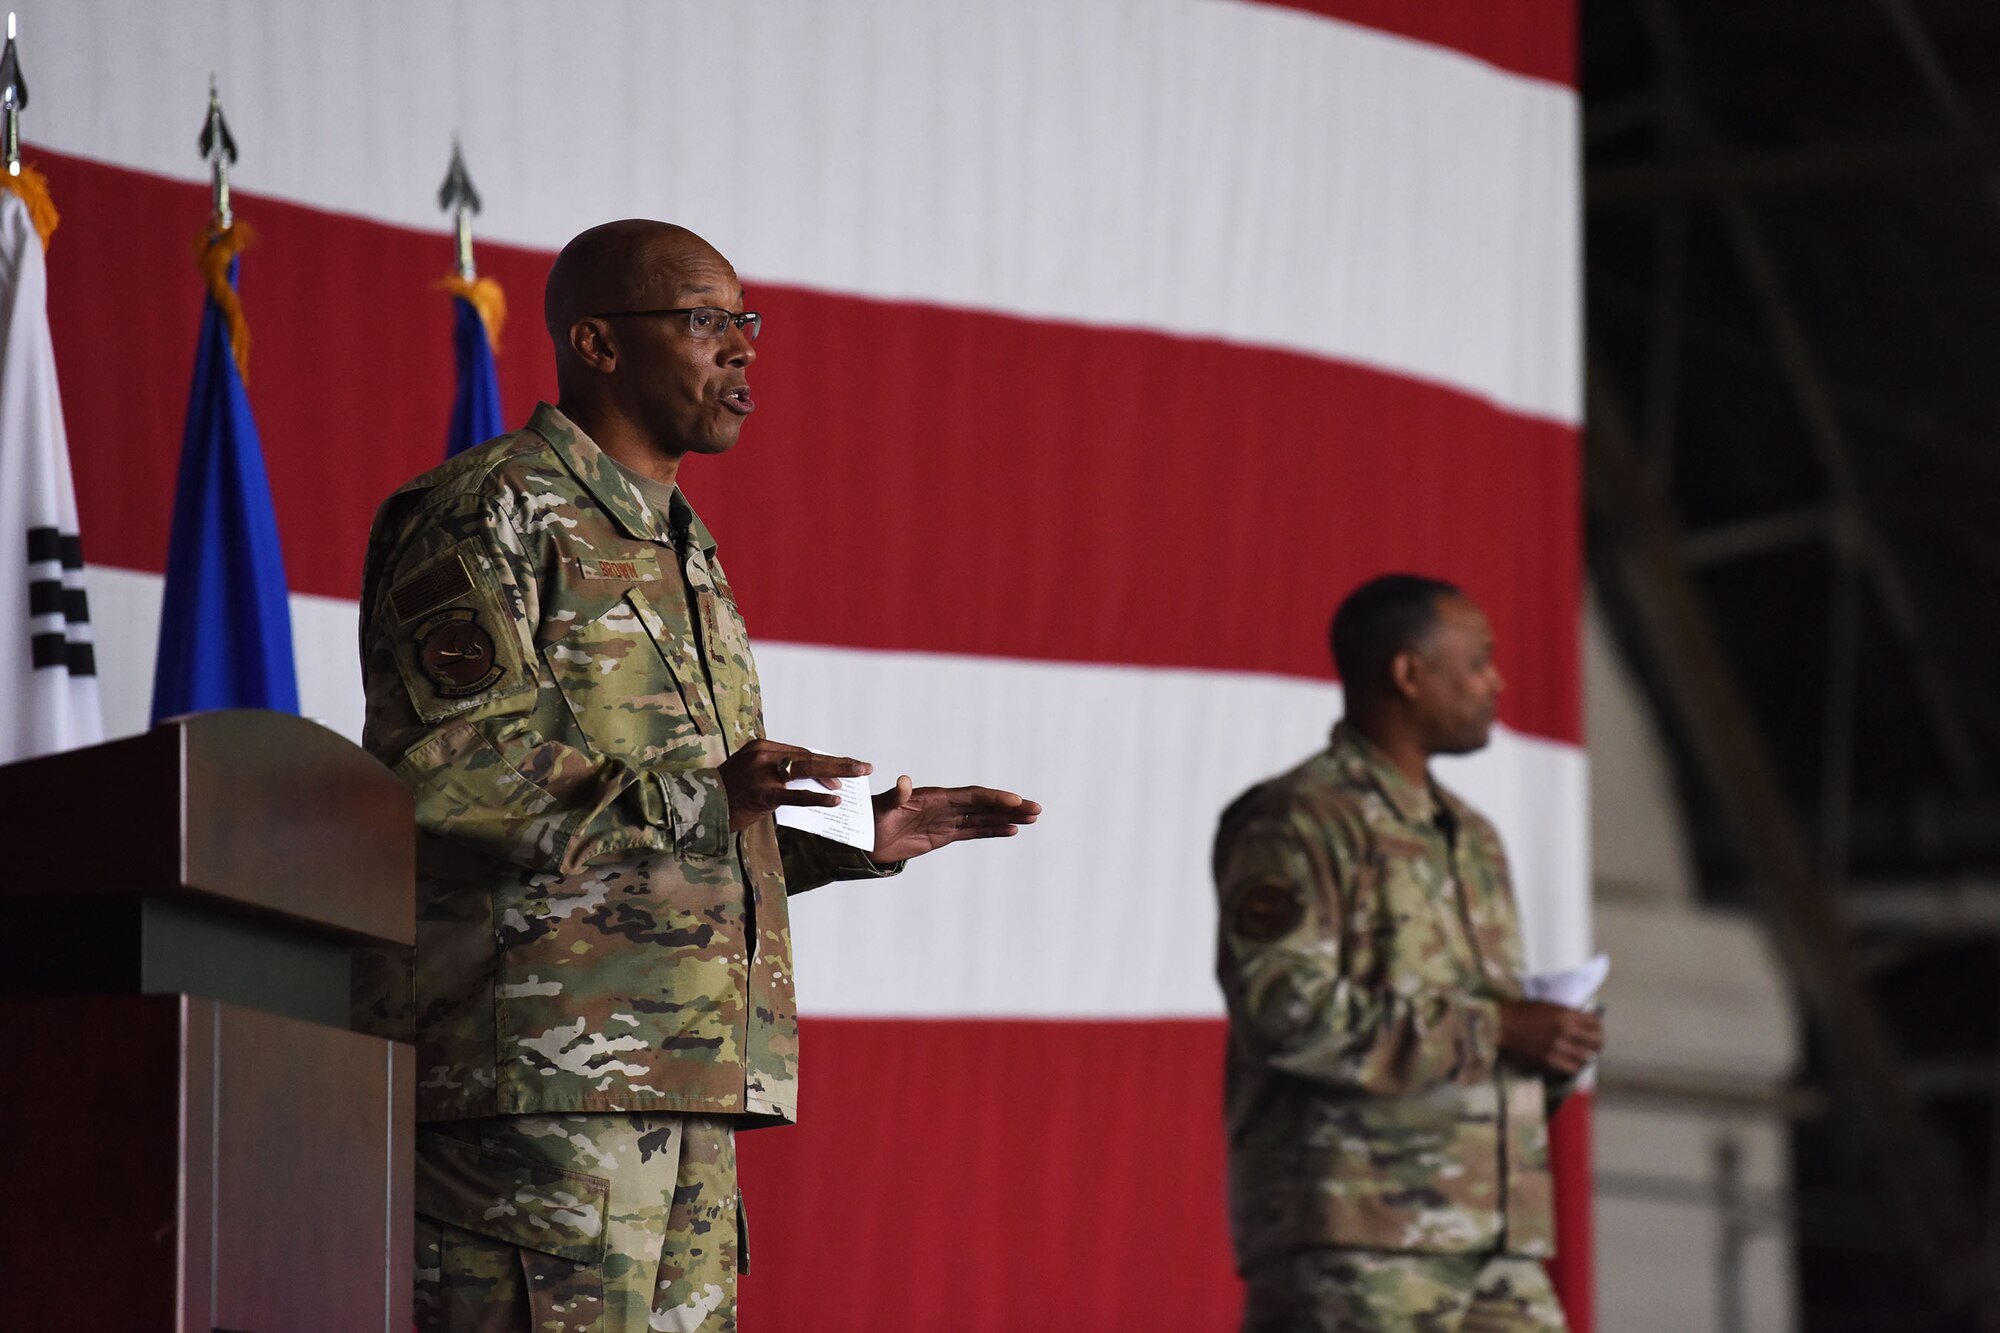 Gen. CQ Brown, Jr., Pacific Air Forces commander, and Chief Master Sgt. Anthony Johnson, PACAF command chief, brief the men and women of Team Osan during an all-call at Osan Air Base, Republic of Korea, Oct. 17, 2019. While gaining an in-depth exposure of the installation’s unique mission, PACAF leadership used the visit as an opportunity to explain PACAF priorities and how vital Team Osan is in contributing to the Indo-Pacific region’s security and stability. (U.S. Air Force photo by Staff Sgt. Benjamin Bugenig)